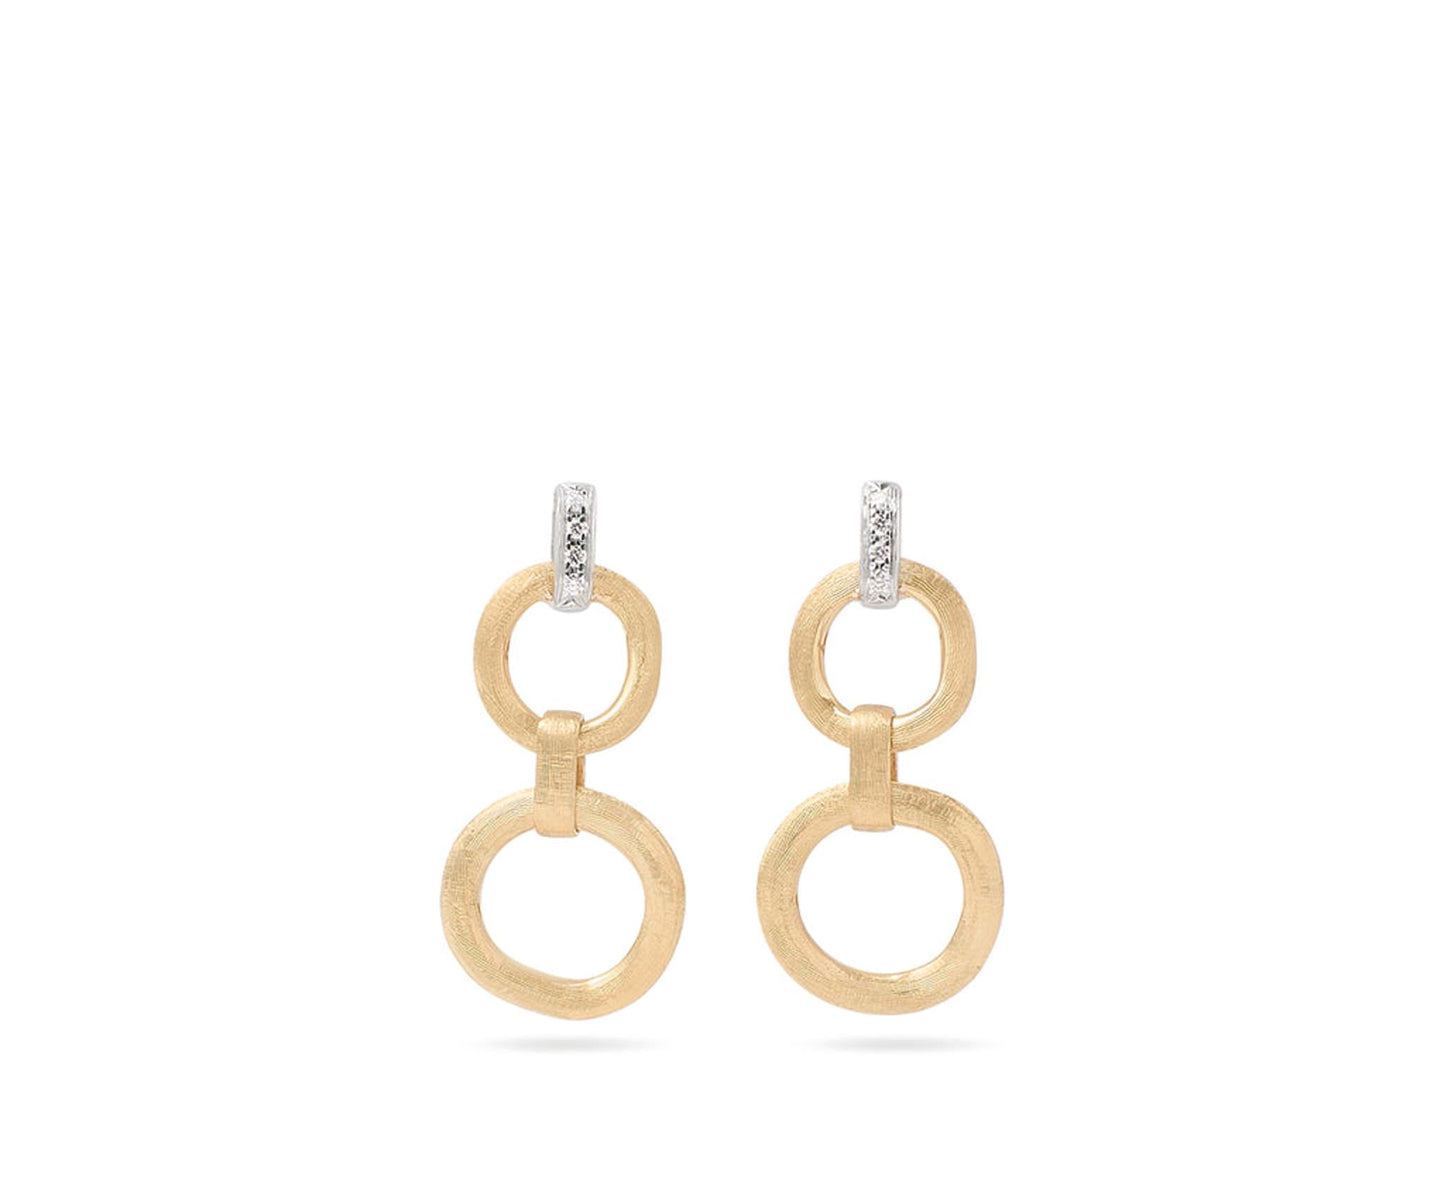 Marco Bicego Jzaipur Gold Double Drop Earrings with Diamonds